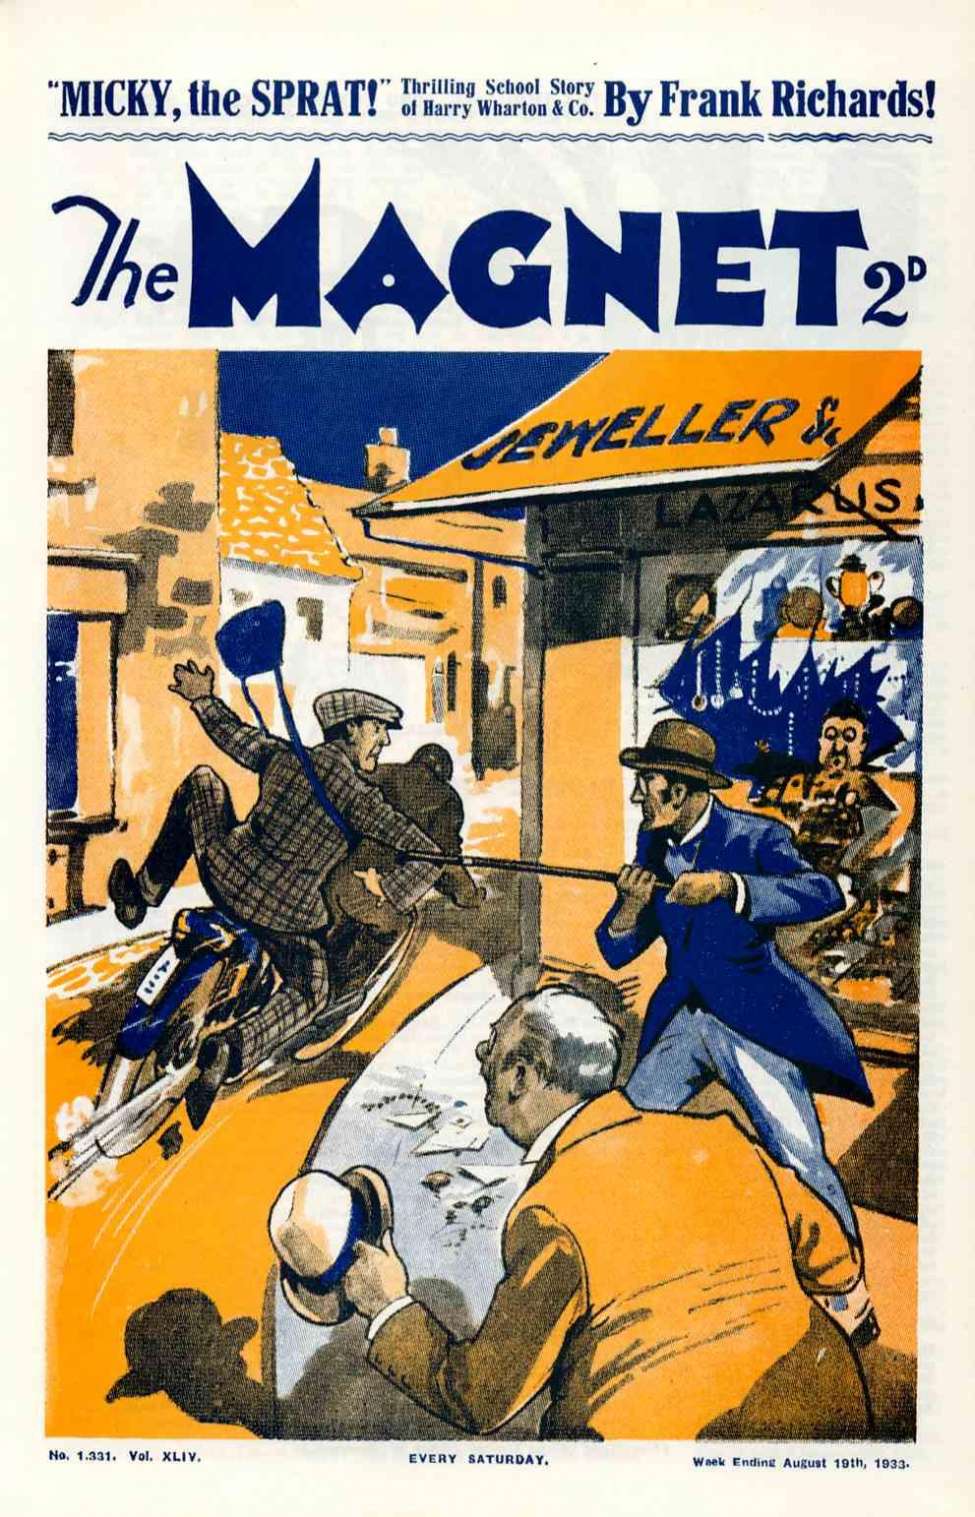 Book Cover For The Magnet 1331 - Micky, the Sprat!